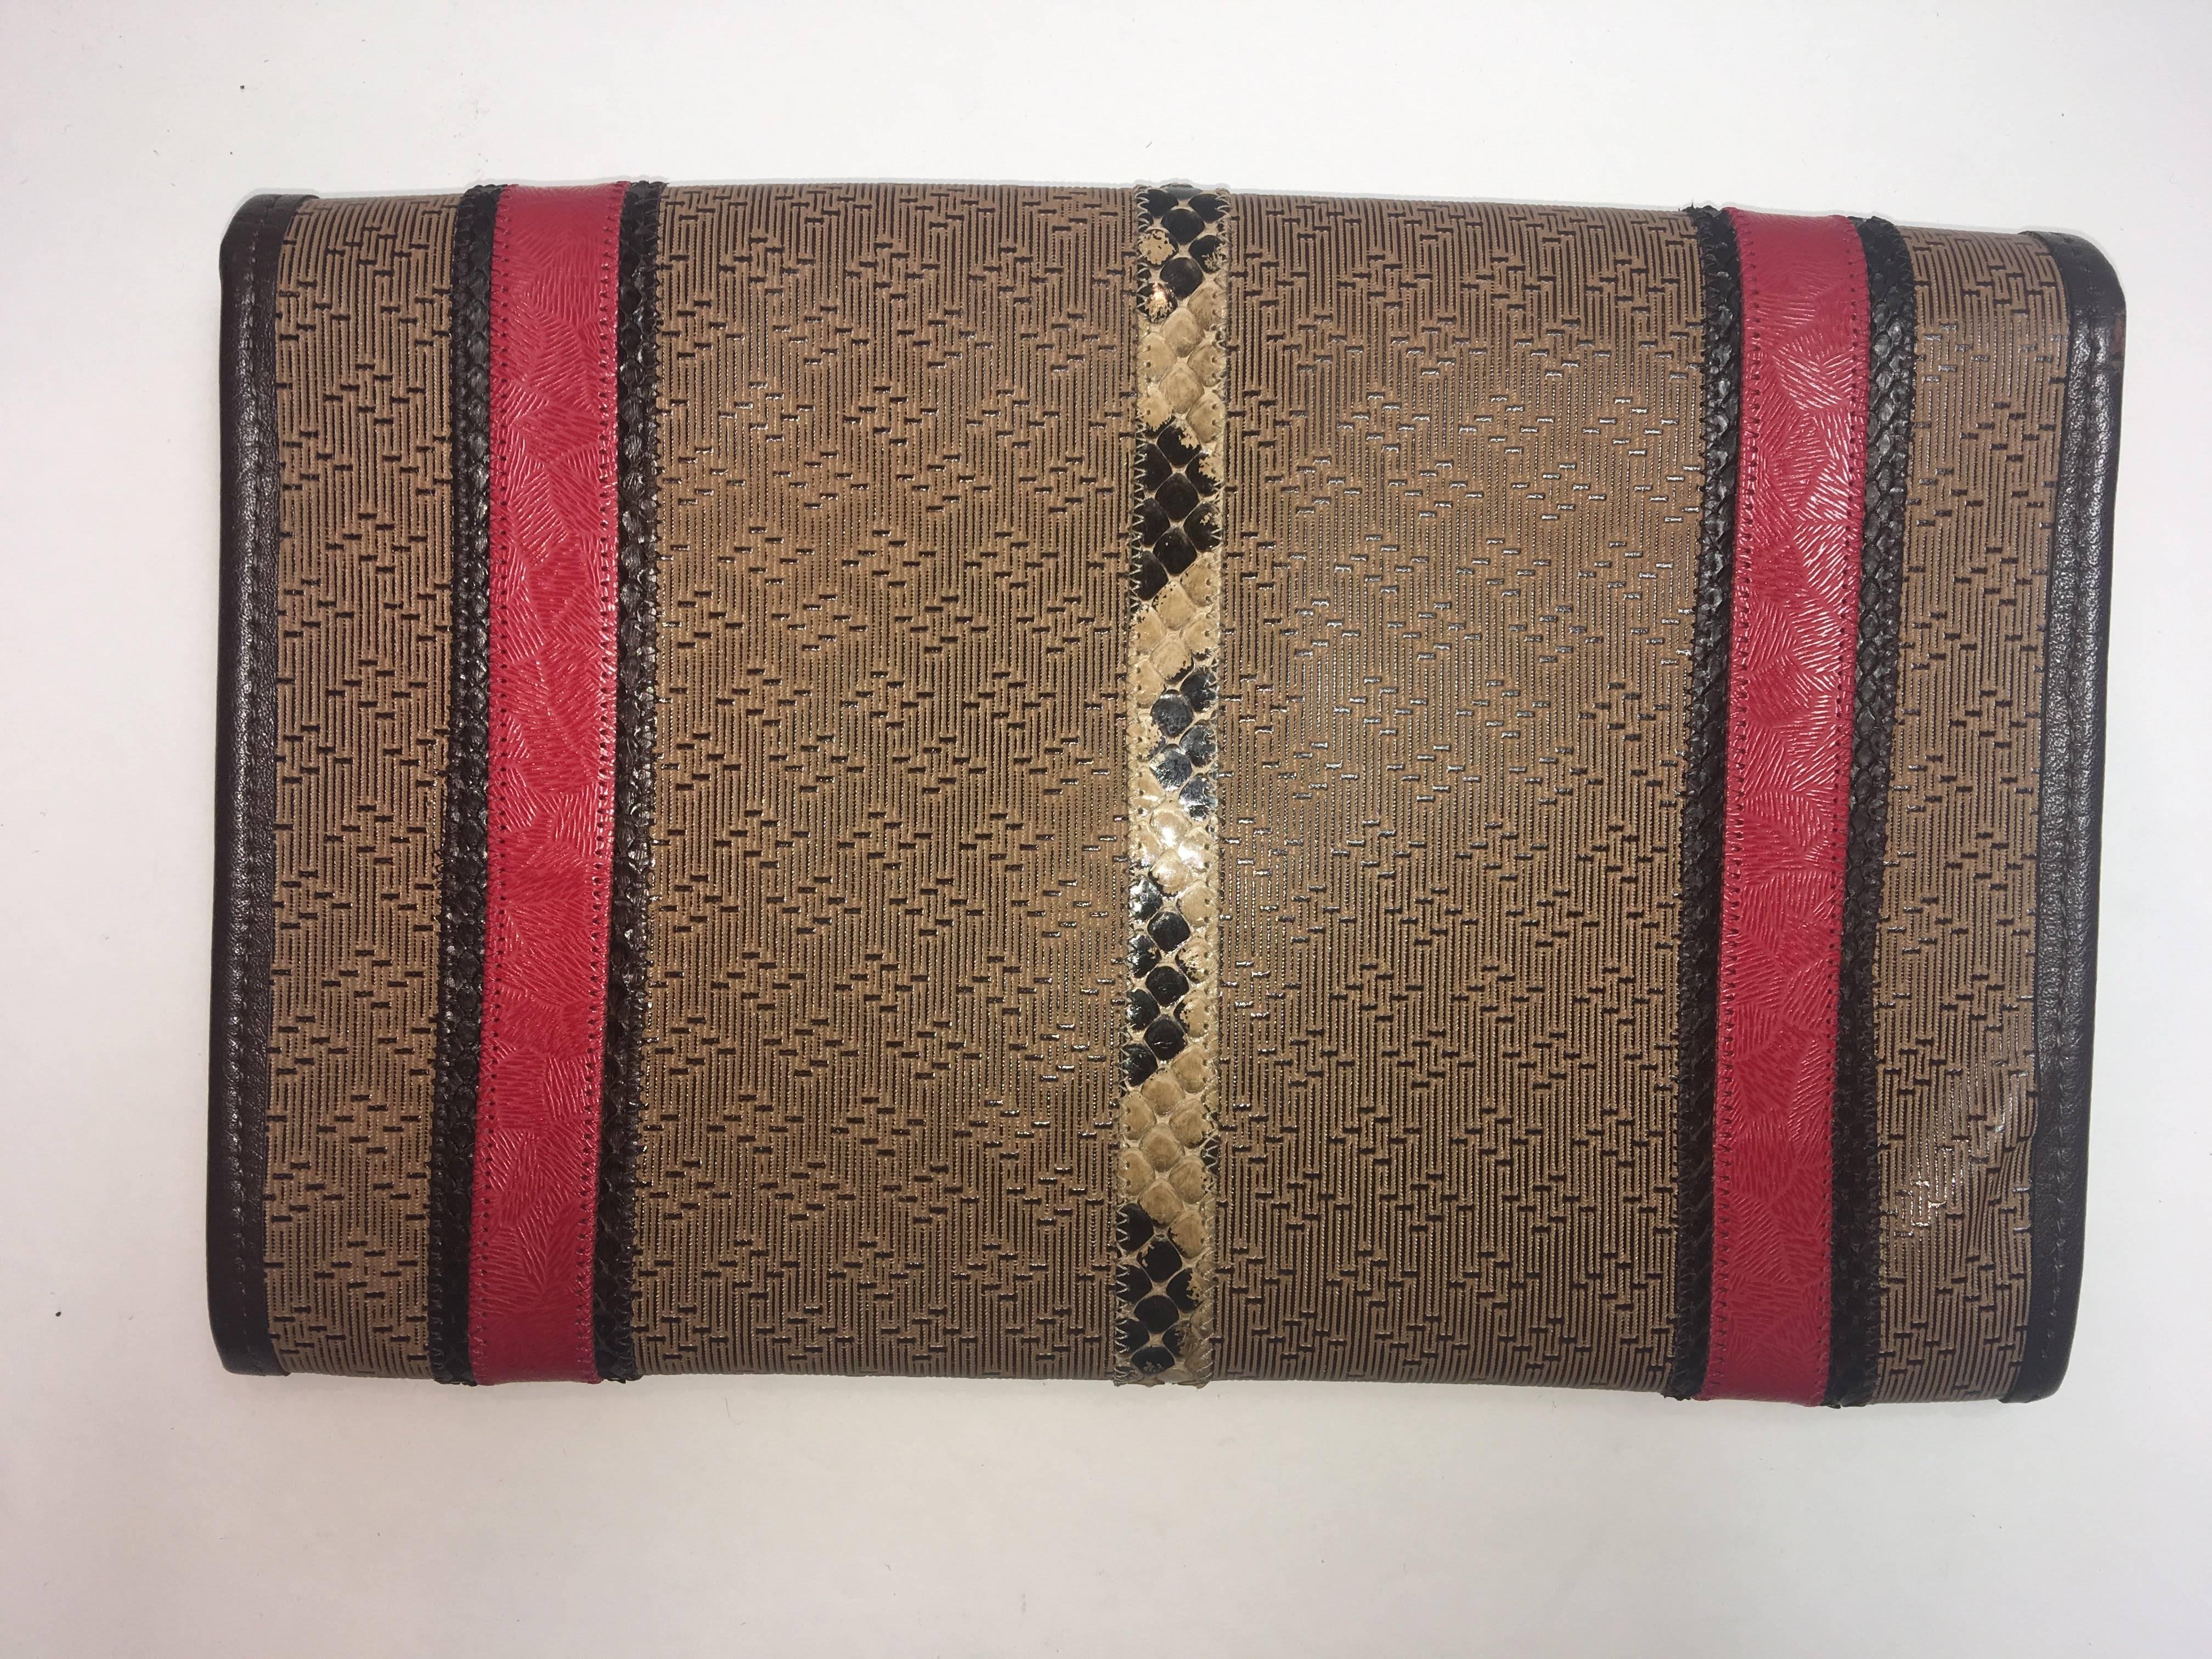 Carlos Falchi Leather Clutch with Fold Over Flap Closure, Multi Colored Aztec Pattern, and Leather Knotted Strap.